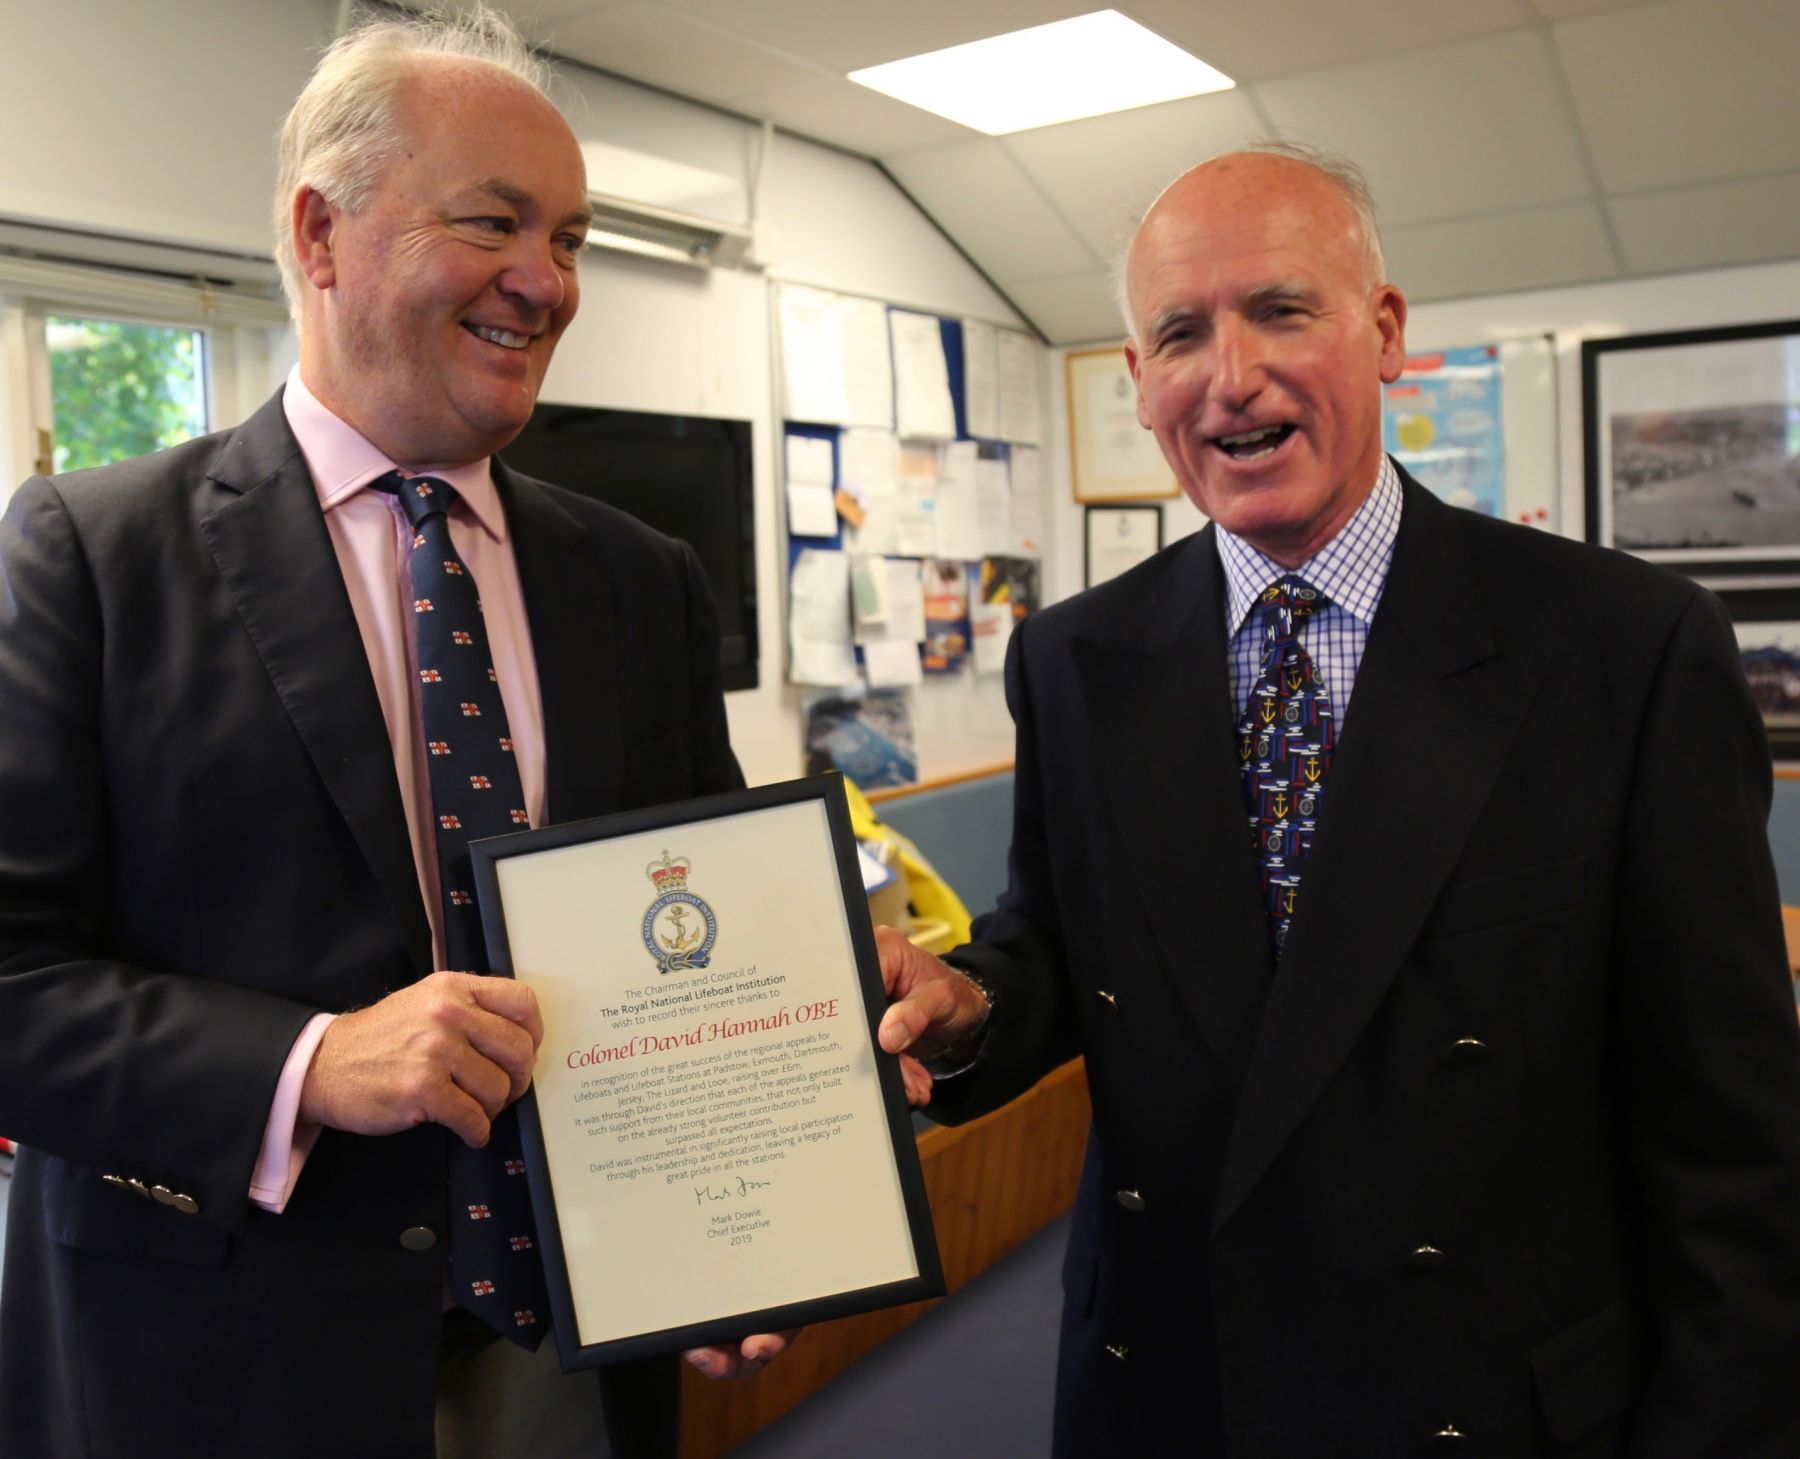 David Hannah being presented with his certificate by Mark Dowie RNLI CEO (Lt) 